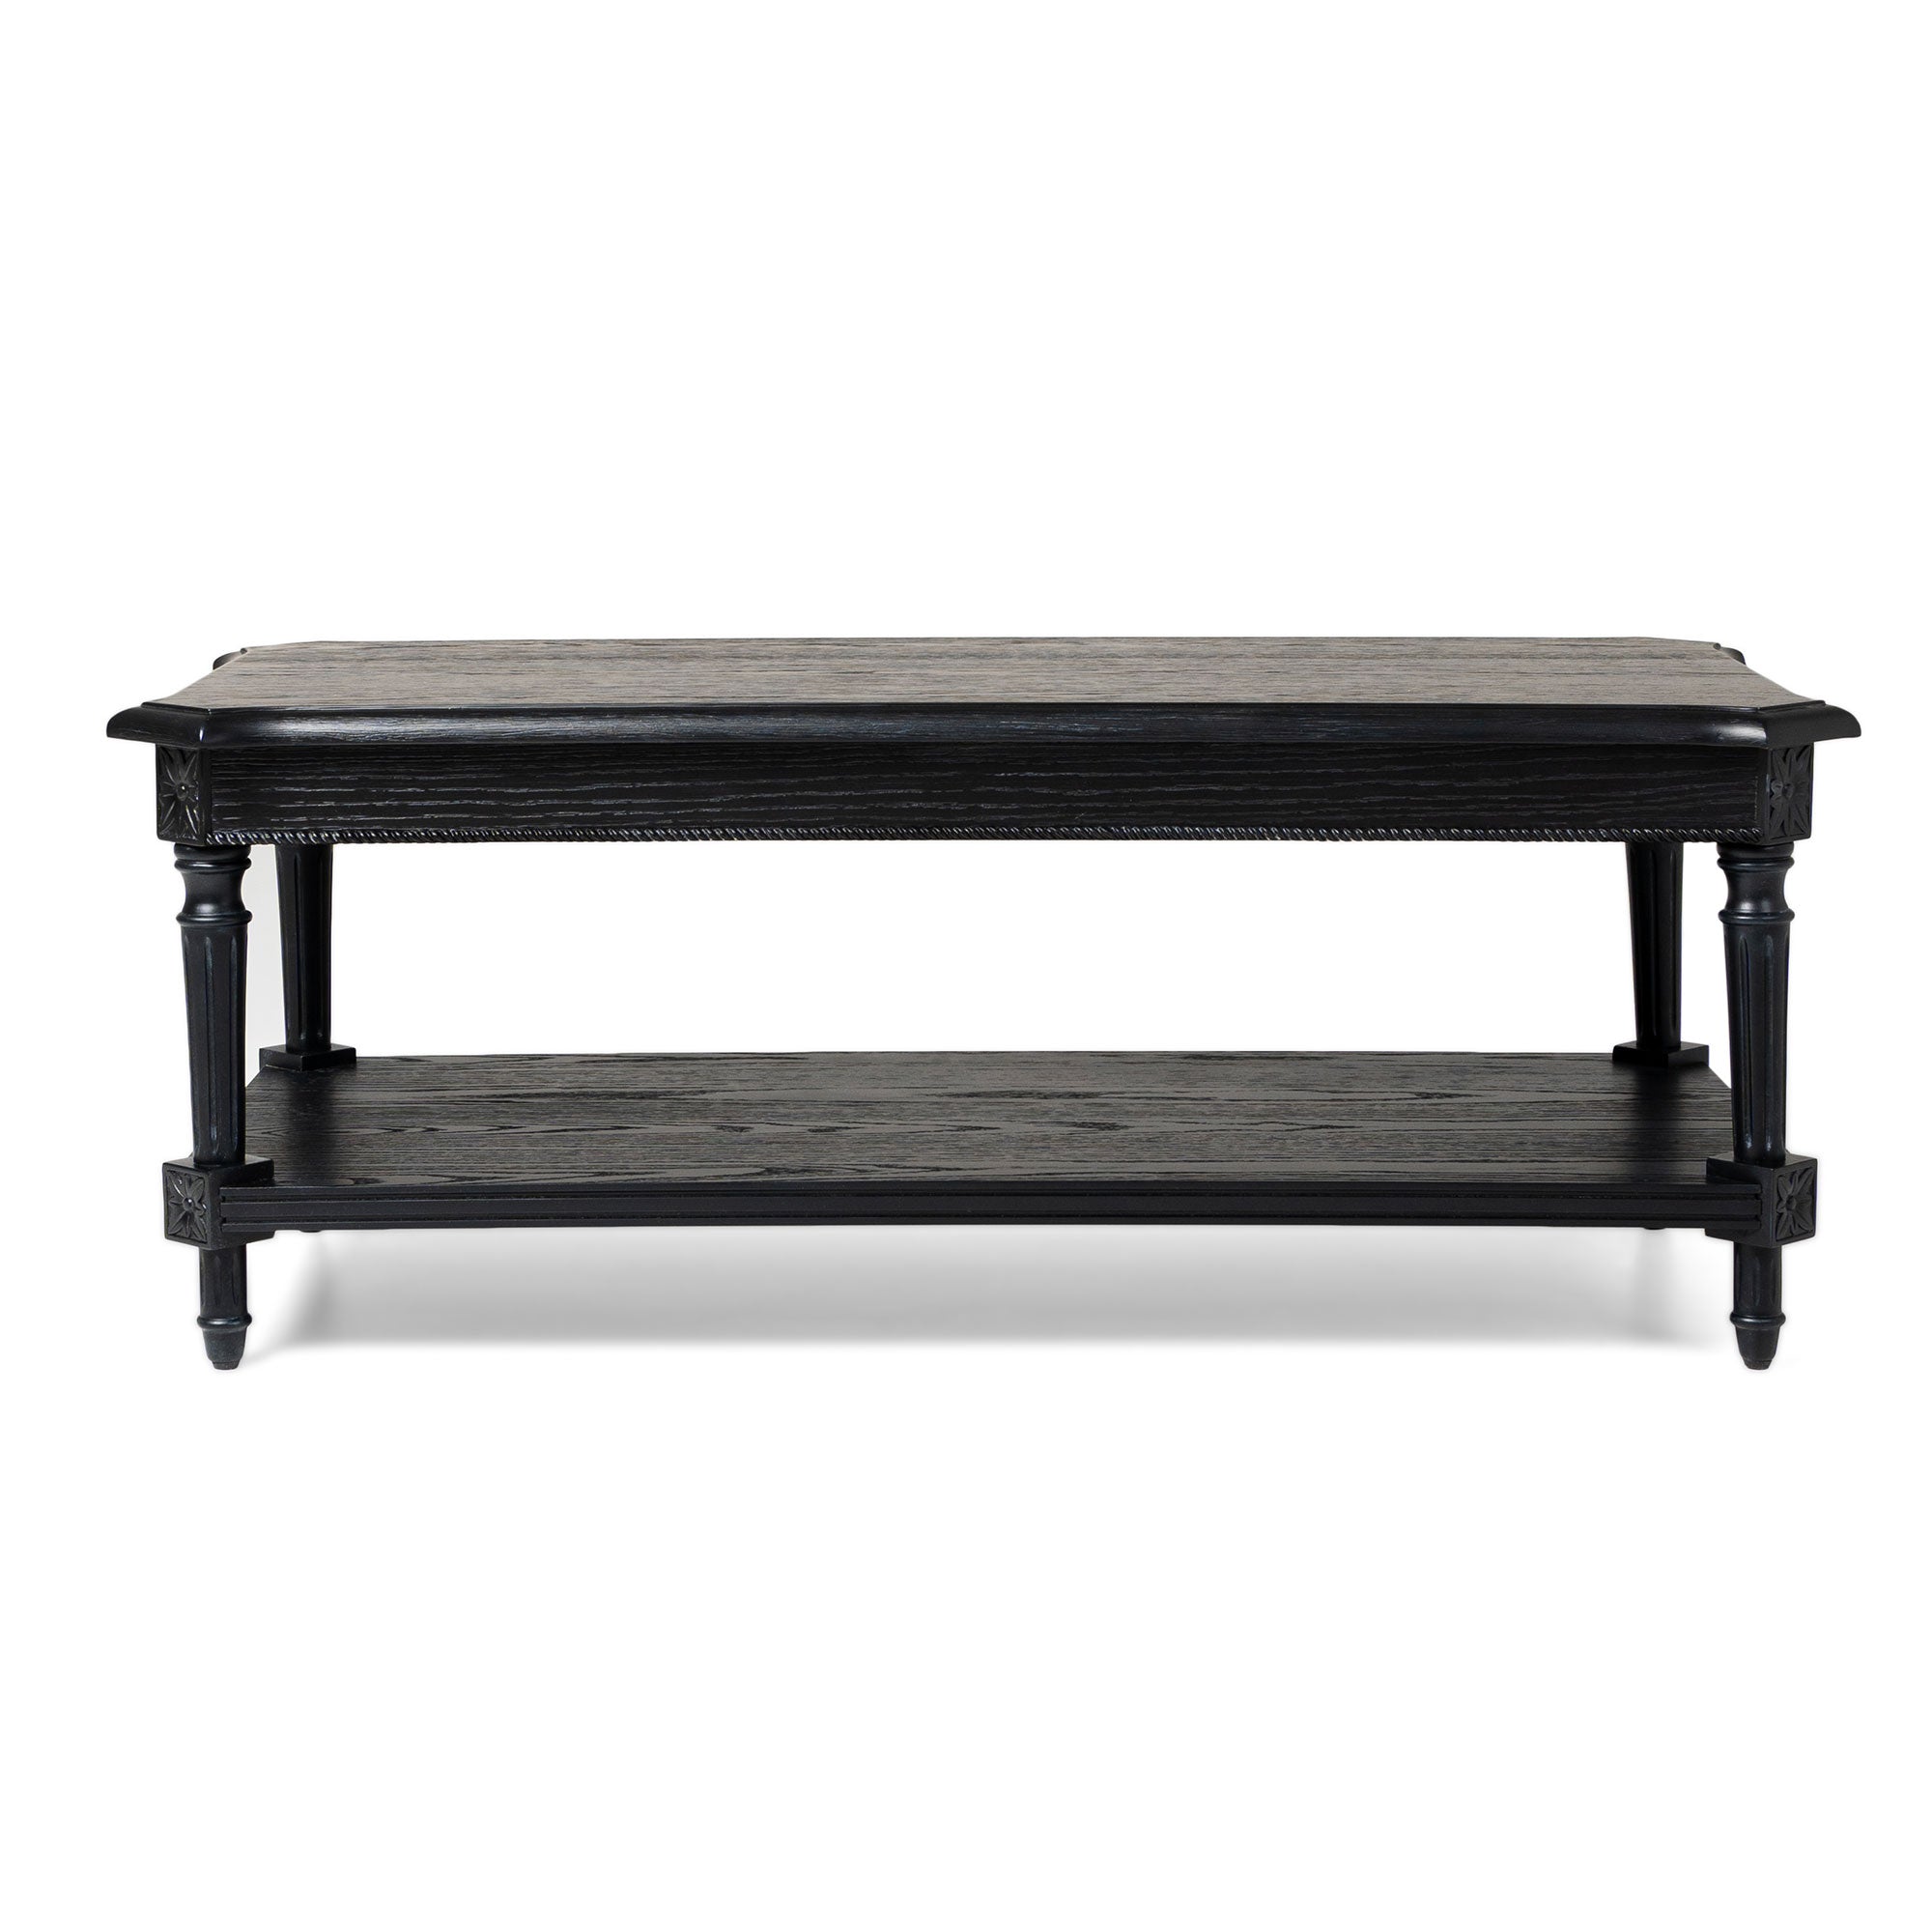 Pullman Traditional Rectangular Wooden Coffee Table in Antiqued Black Finish in Accent Tables by Maven Lane